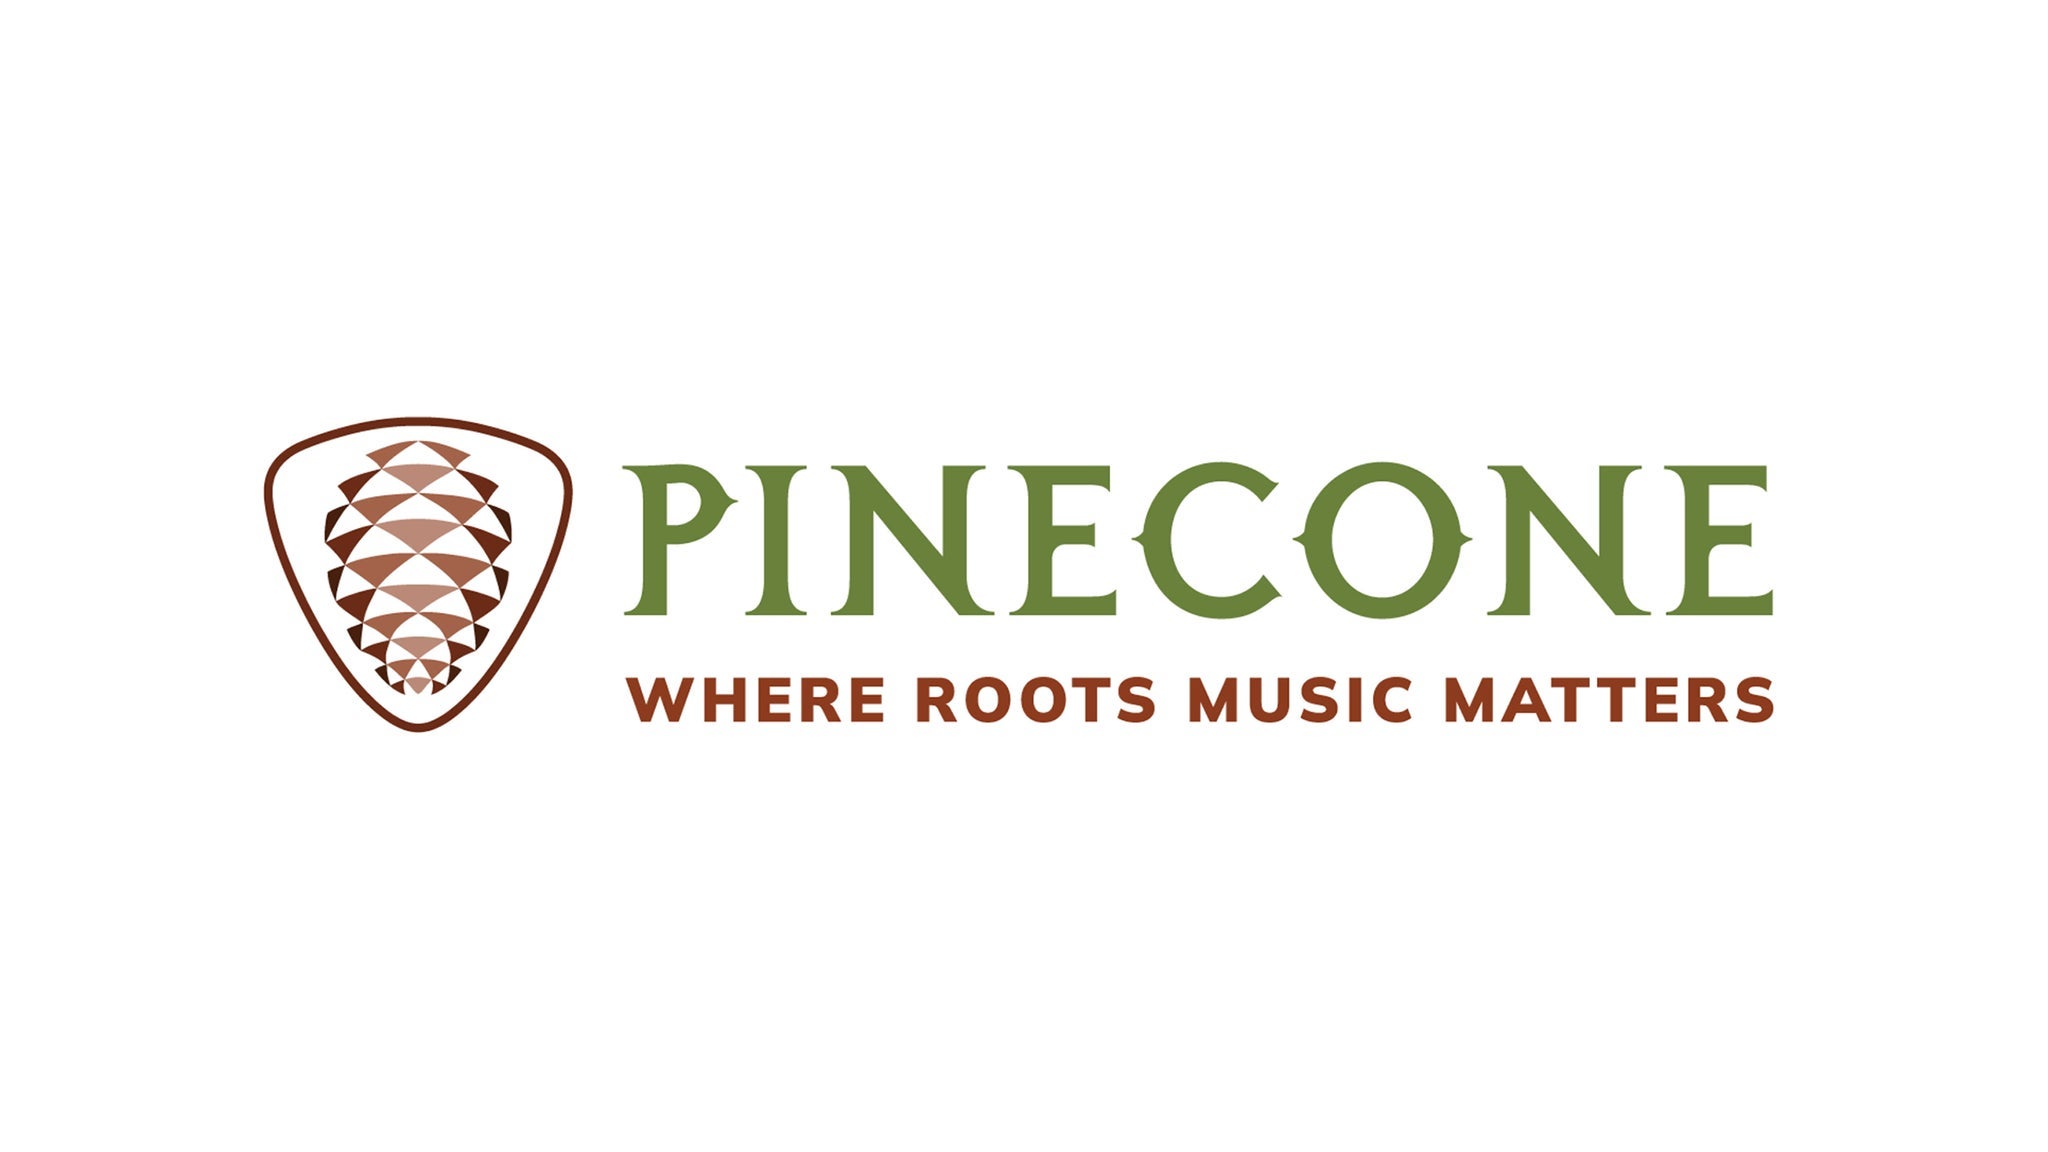 Pinecone: Dawn Landes & Friends reimagine Liberated Womens' Songbook presale password for genuine tickets in Raleigh